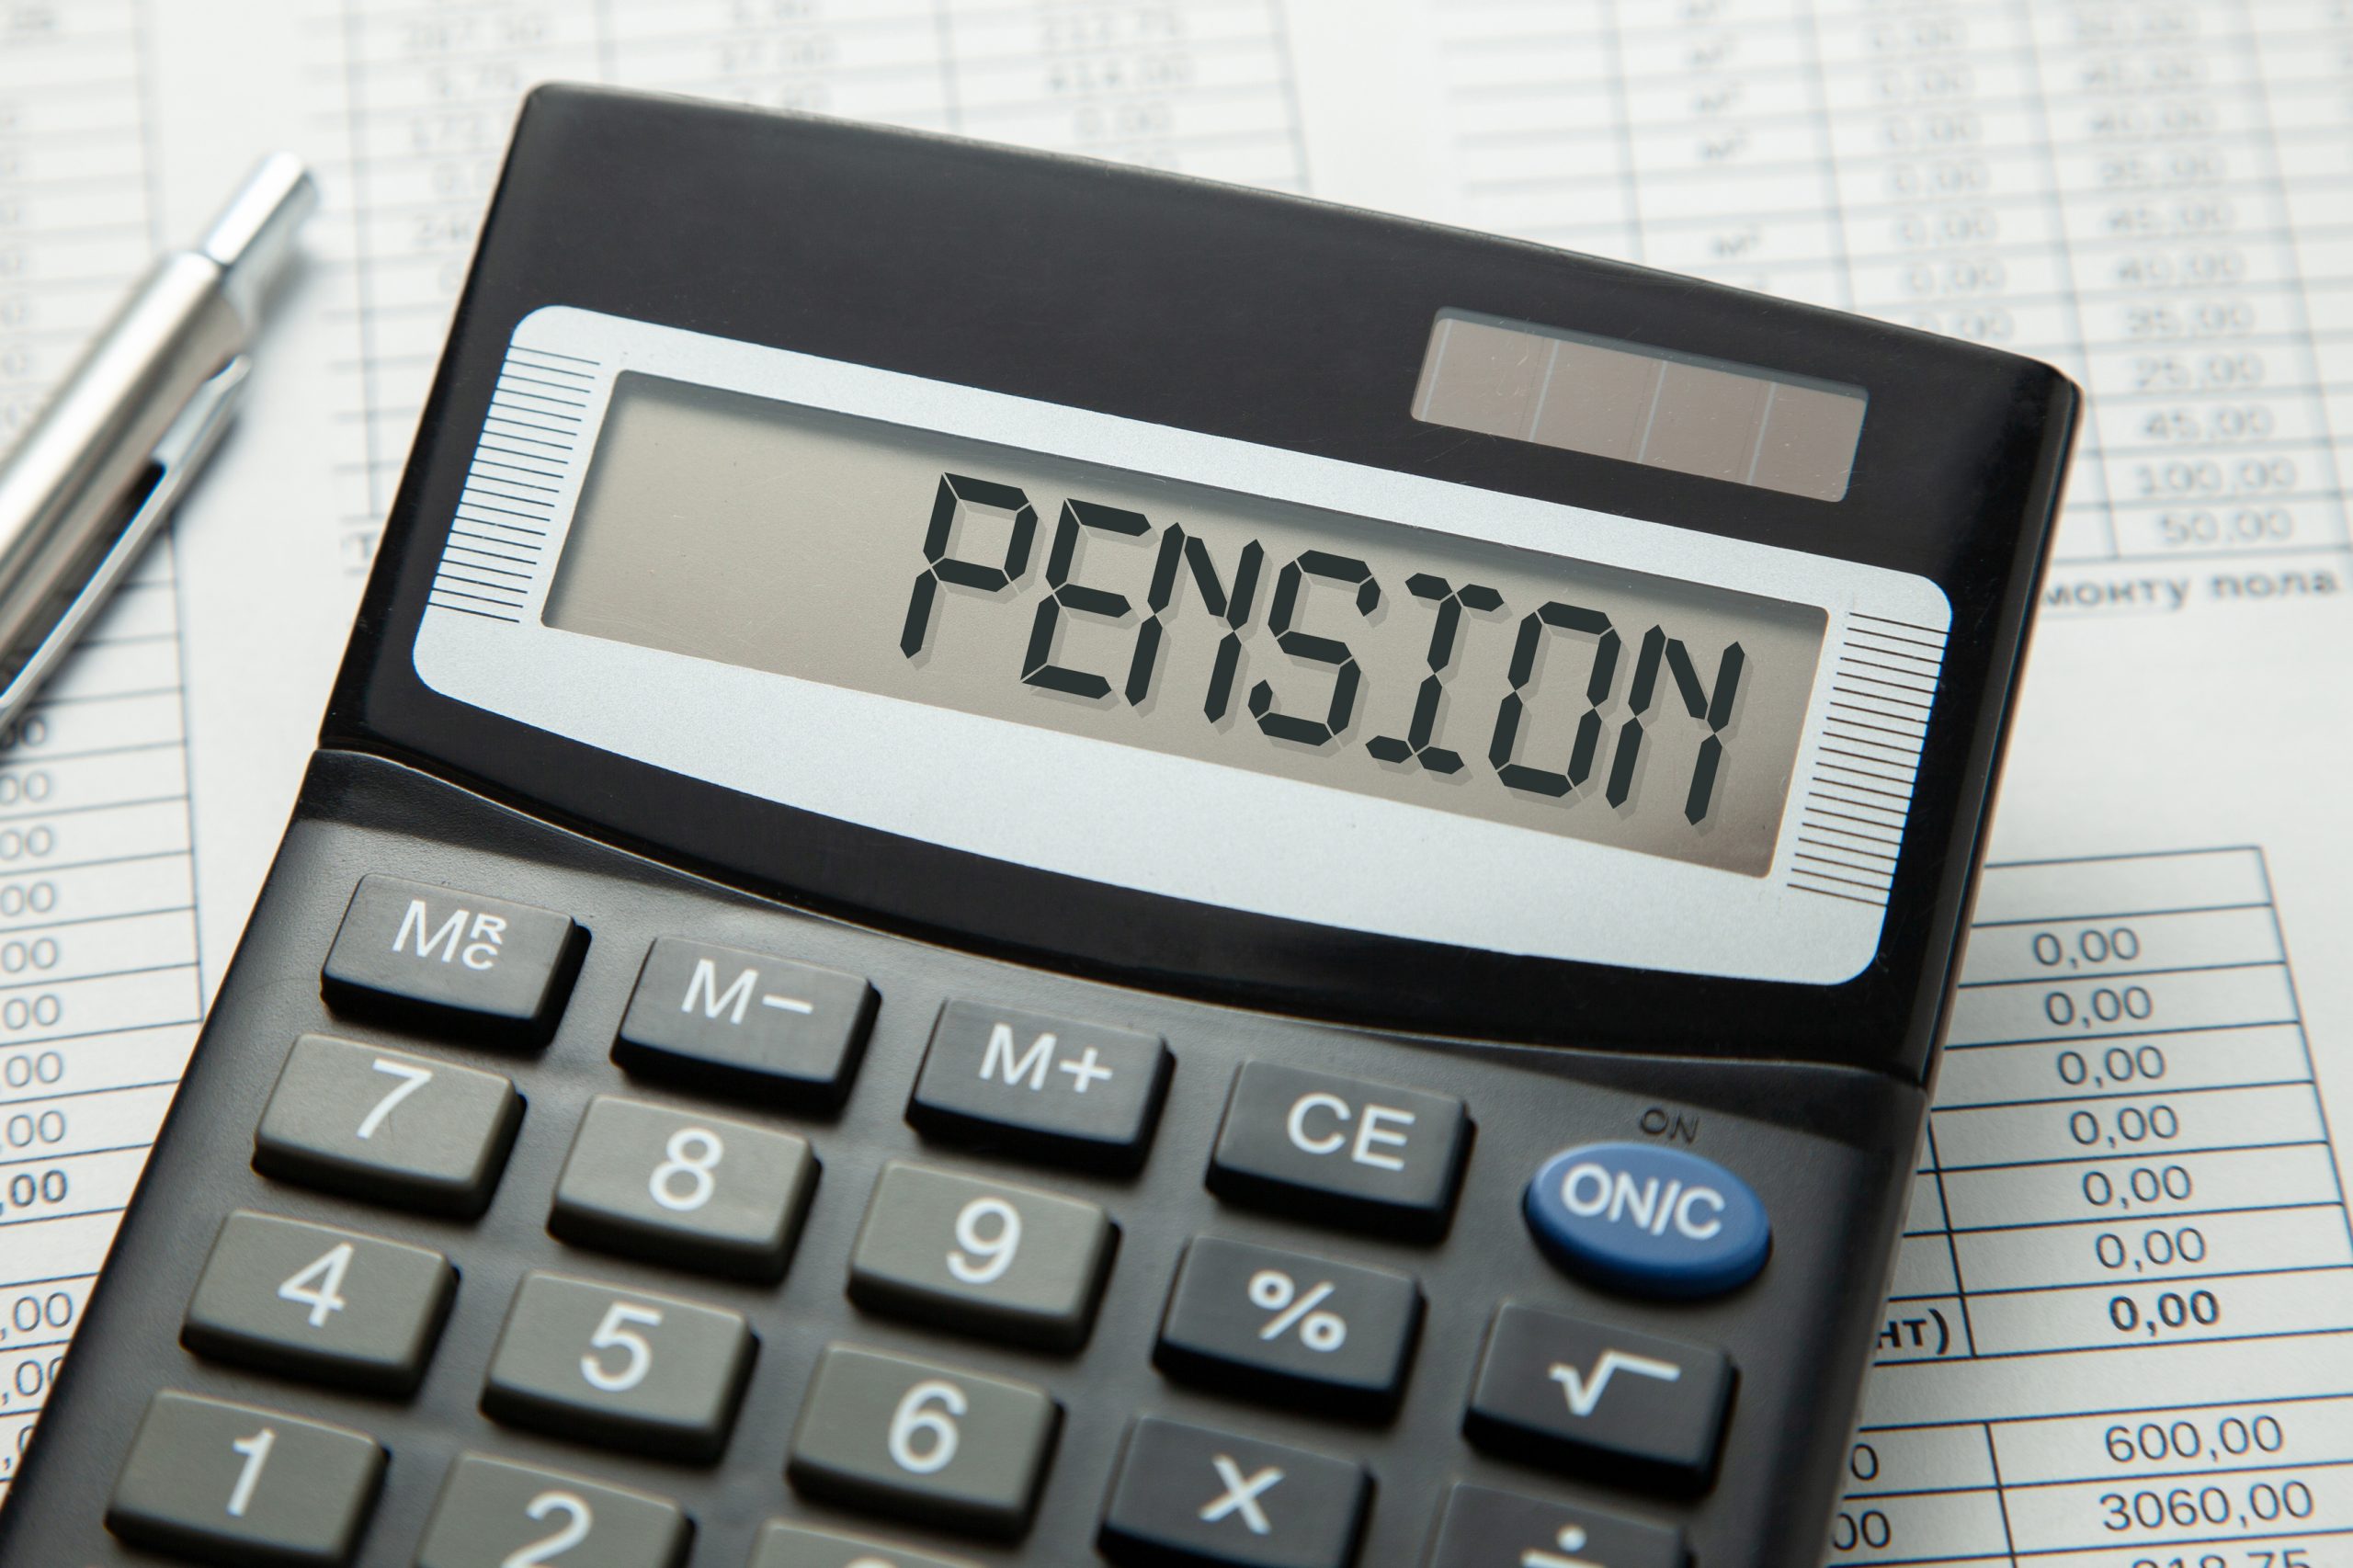 Pension Reform Newsletter: Examining Private Equity in Public Pension Investments, the Growth of Pension Debt in 2020, and More